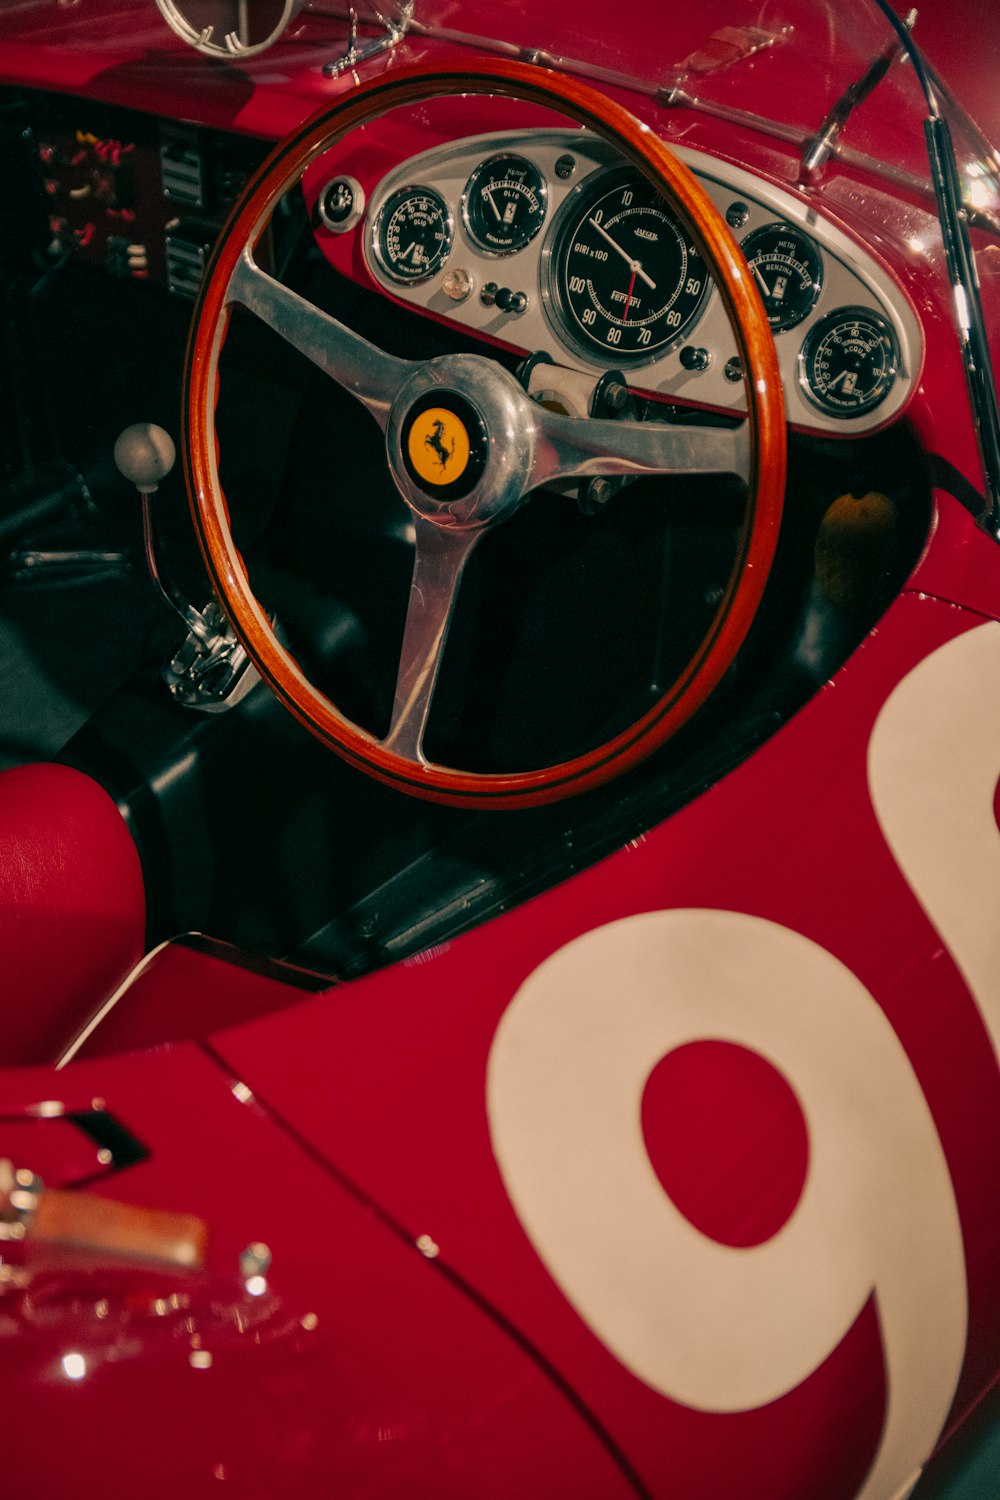 the steering wheel and dashboard of an old race car